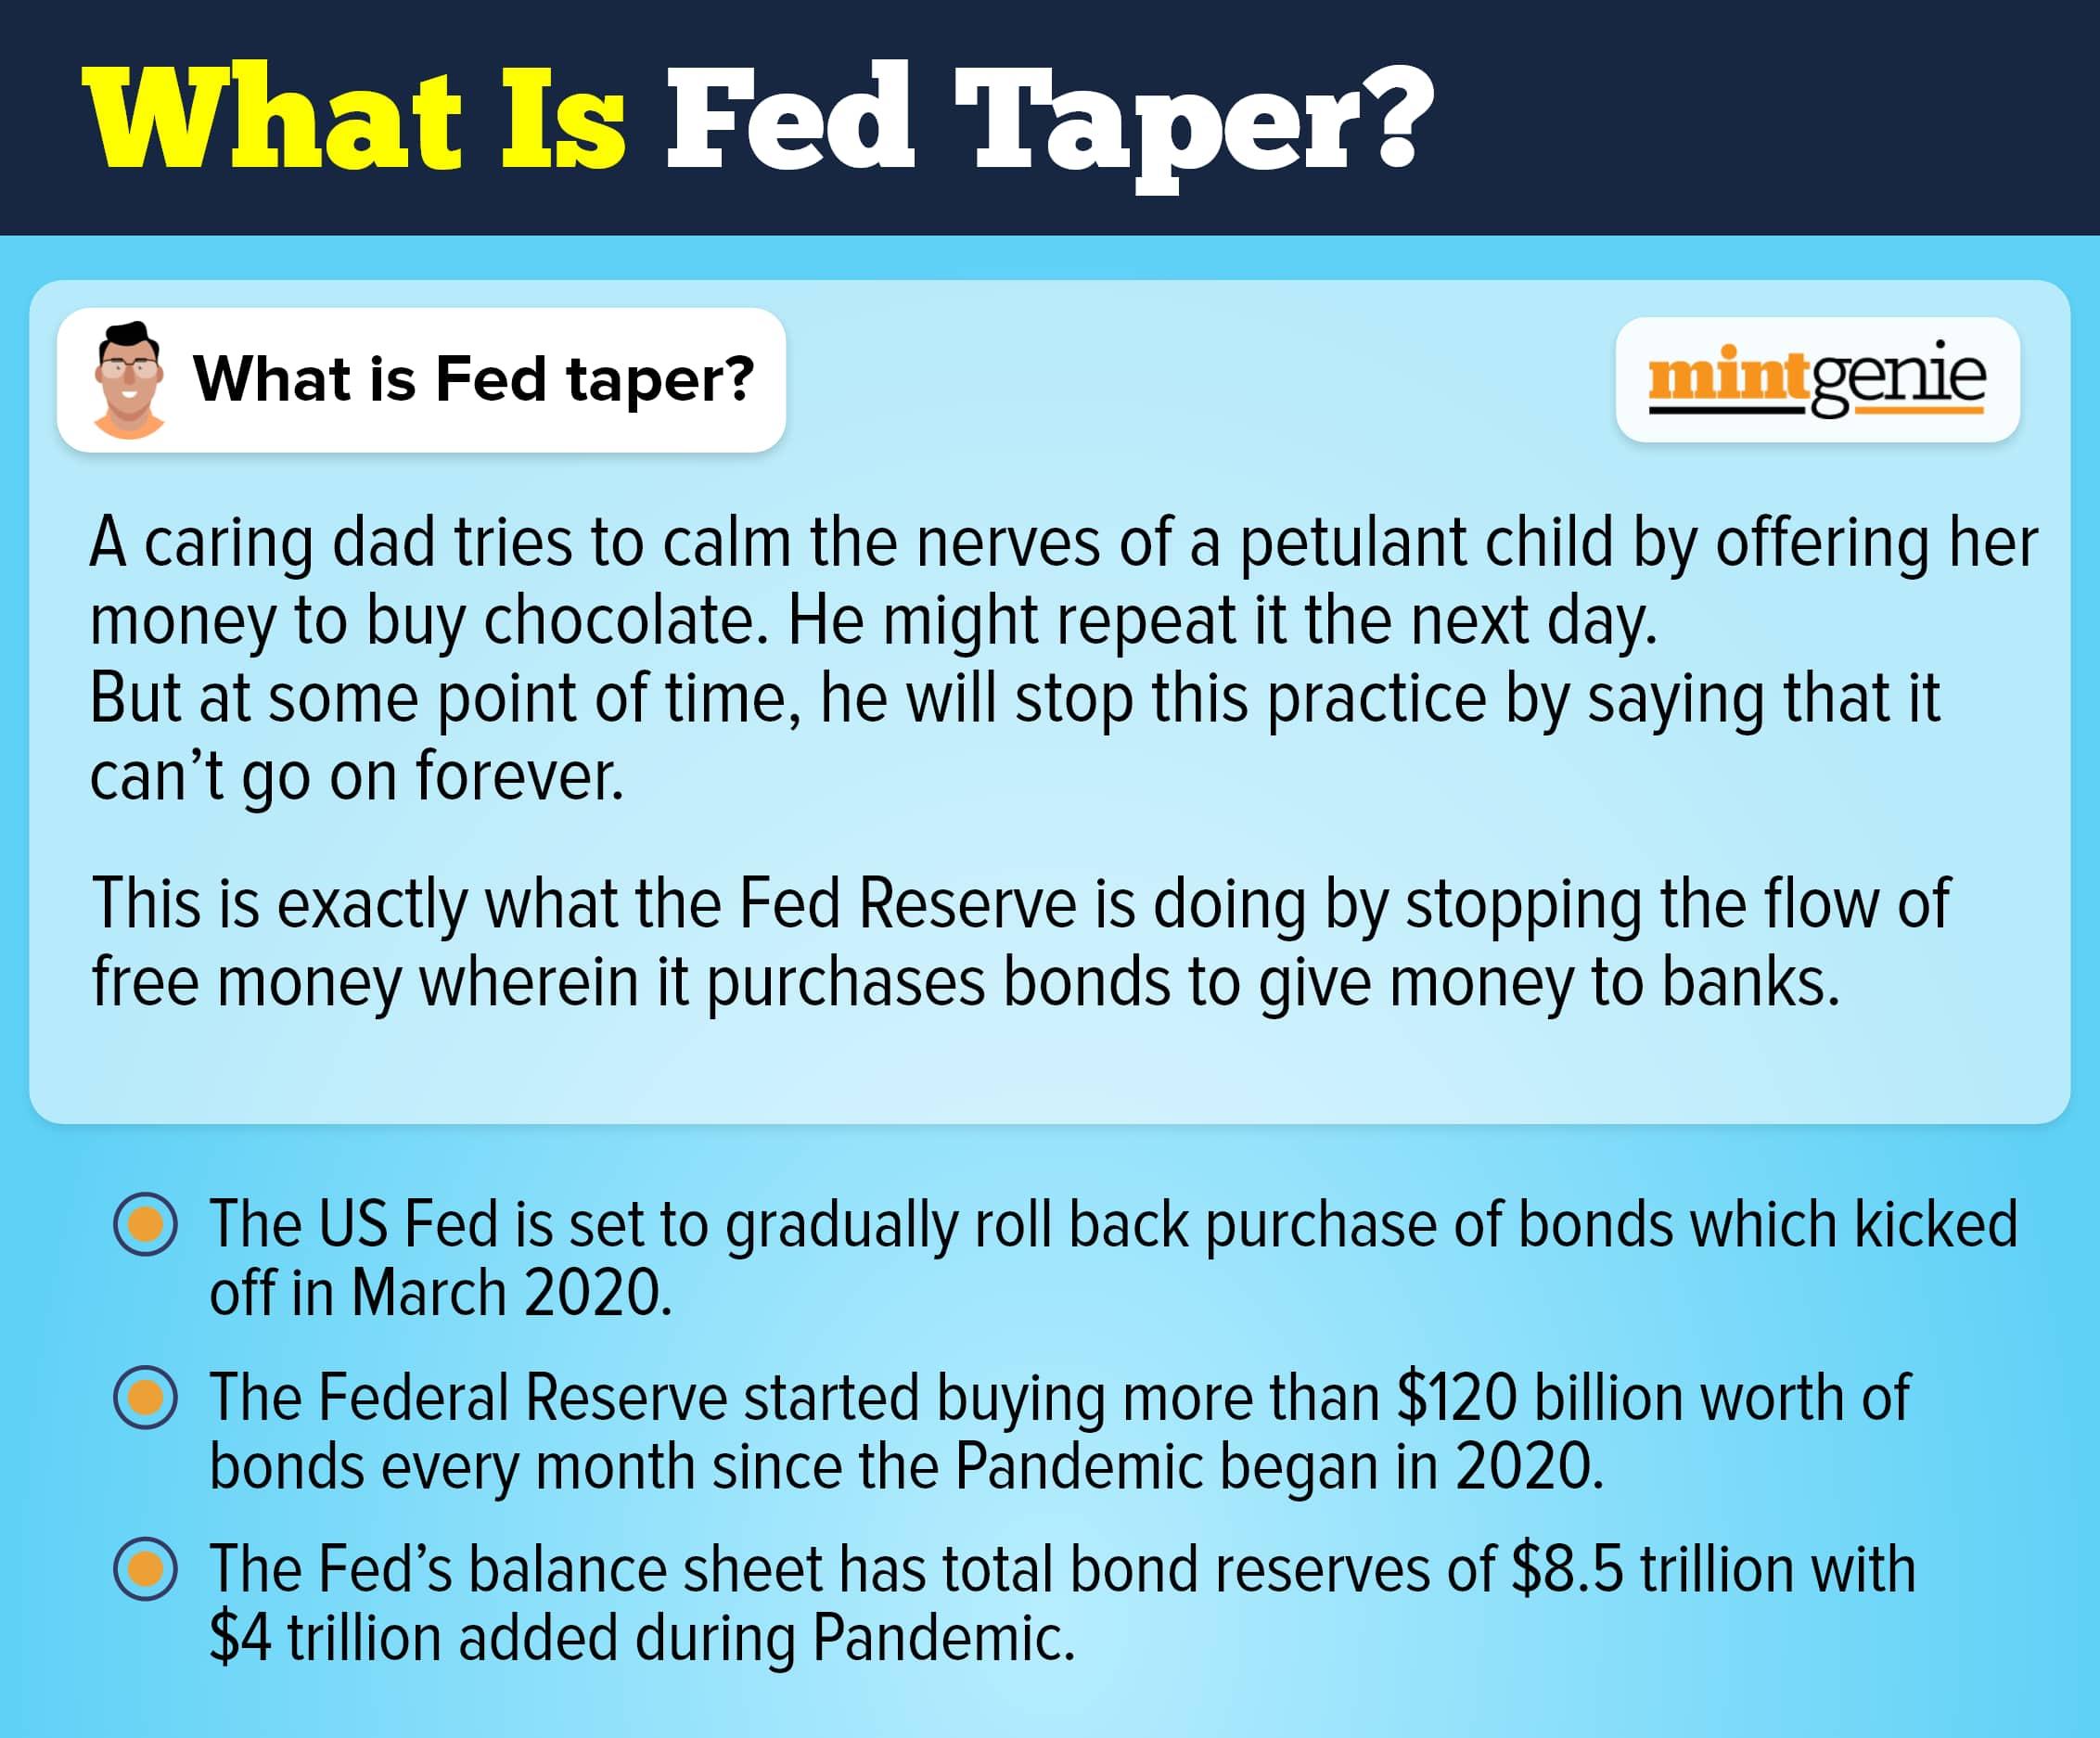 We explain in detail what is the tapering of bond purchases by US Federal Reserve.